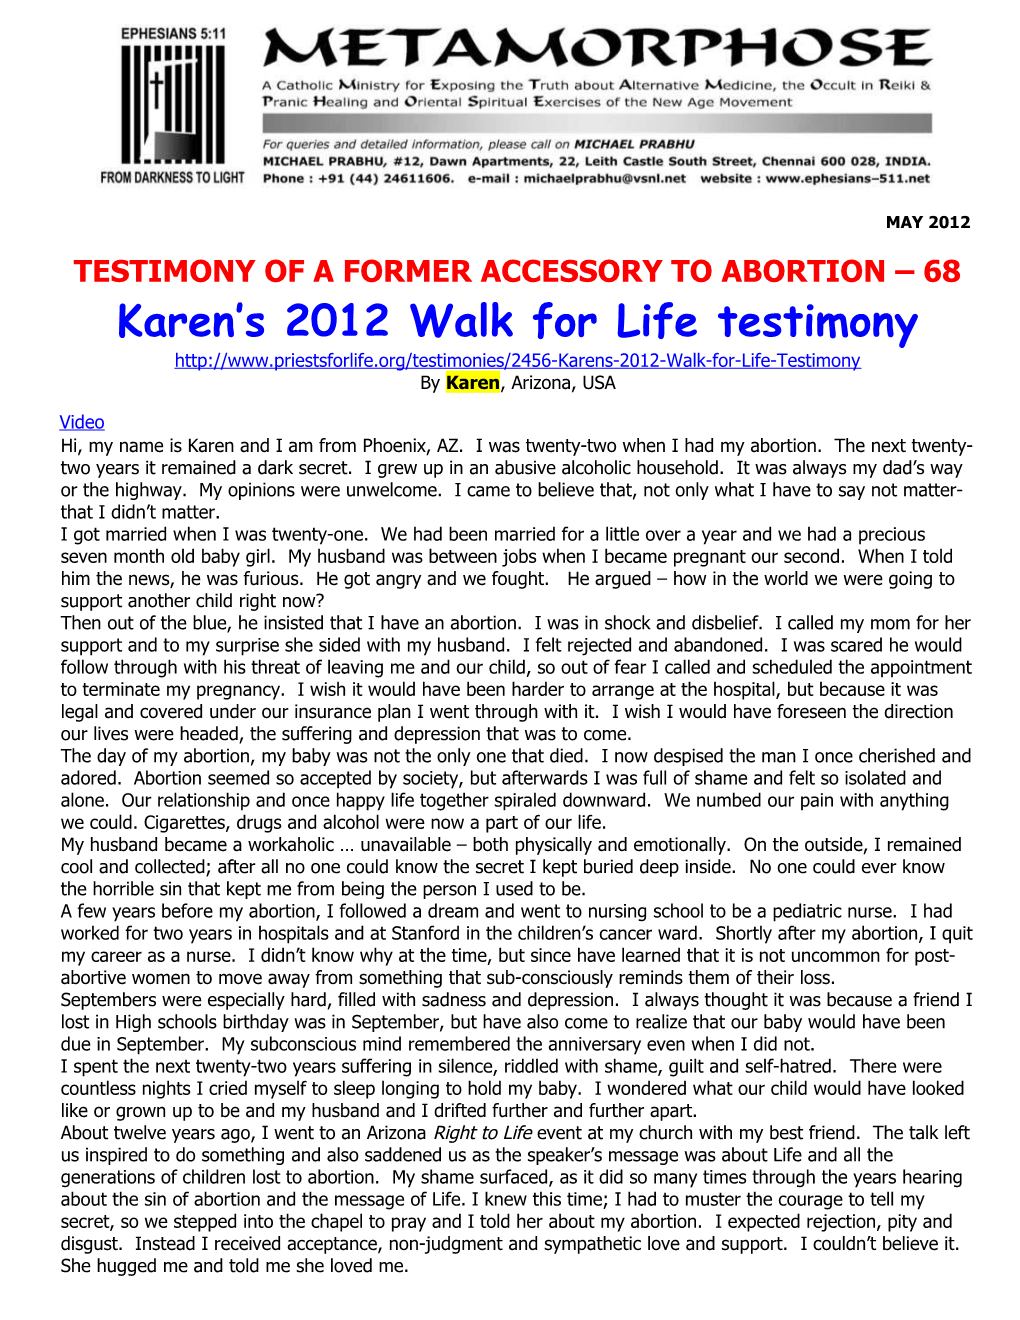 Testimony of a Former Accessory to Abortion 68